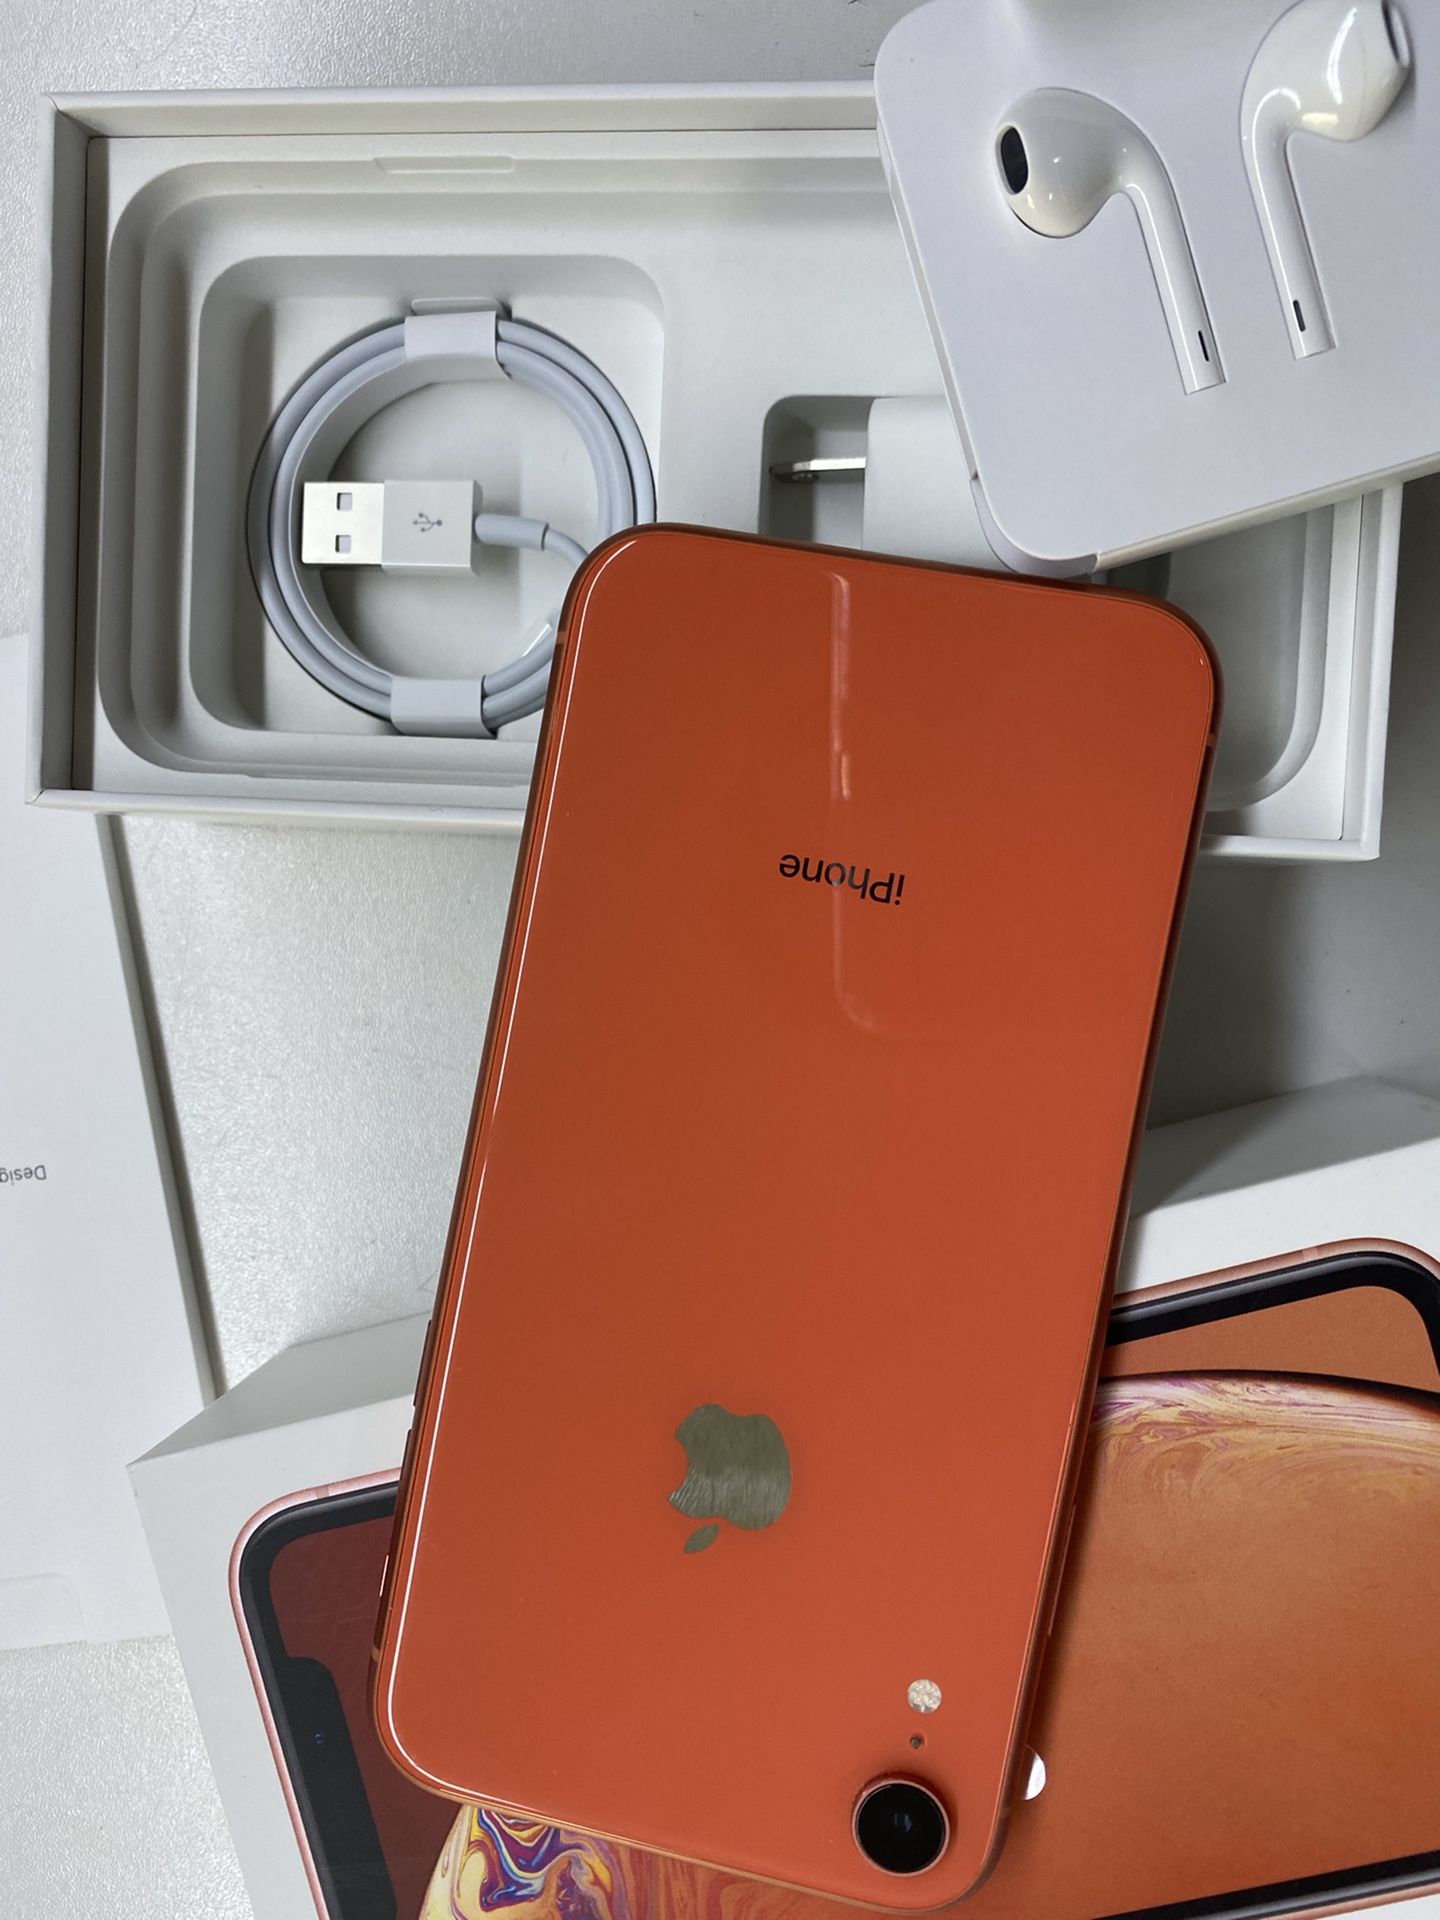 iPhone XR 128g Coral color unlock